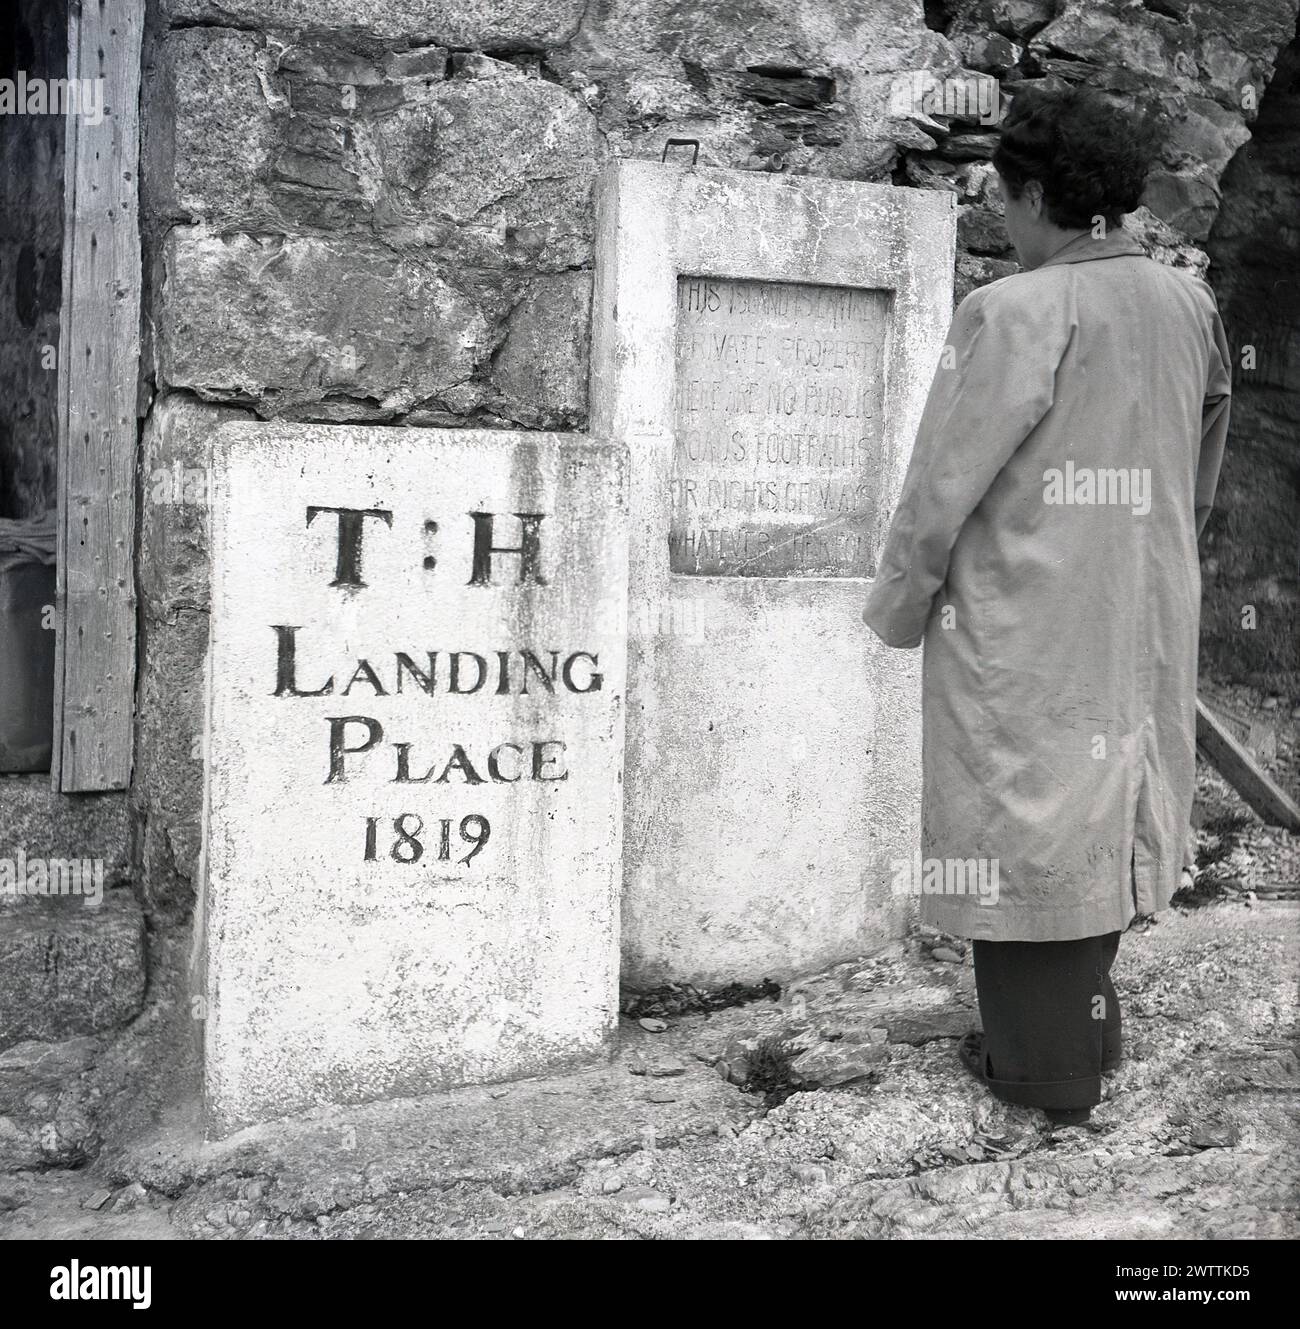 1950s, historical, on Lundy Island, a lady standing at two ancient granite  monuments. One statesl T:H Landing Place 1819. The other, taller one, has an engraving..... This Island Is Private Property..No Public Roads Or Footpaths. Lying in the Bristol Channel, off the coast of North Devon, the small Island of Lundy - literally puffin as from the bird - has many ancient monuments and listed buildings and is only accessible by boat. Stock Photo